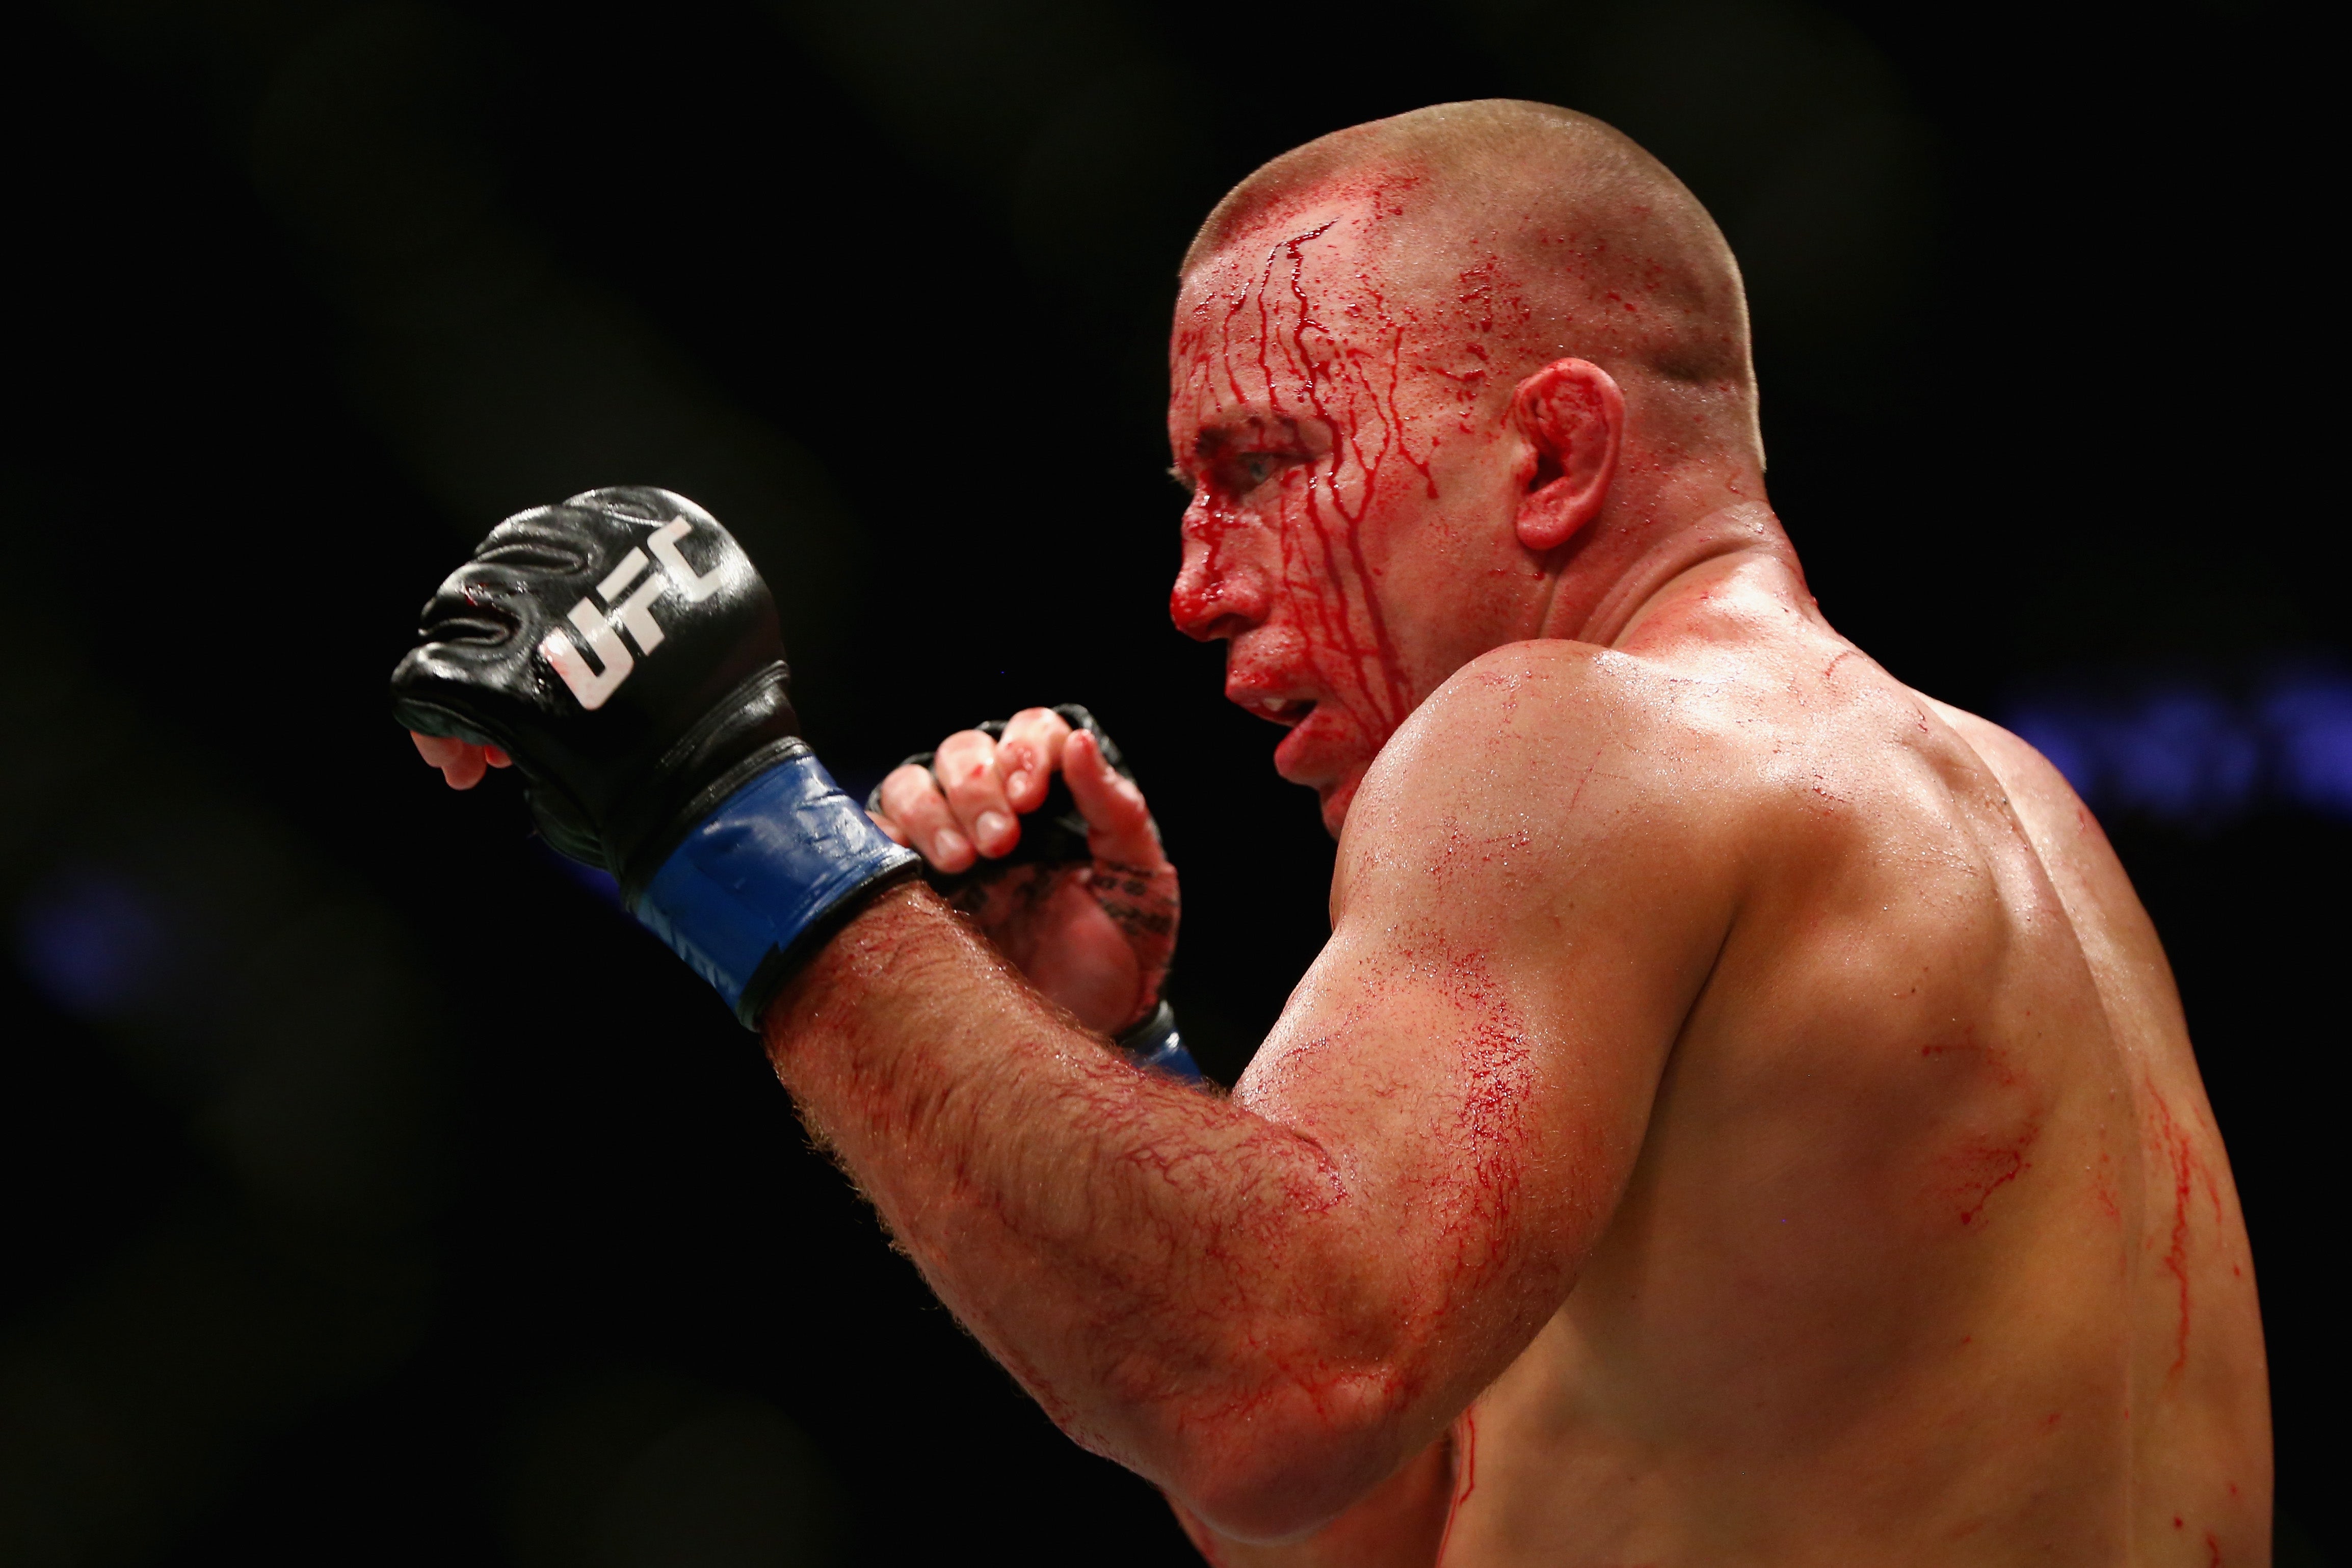 Georges St-Pierre reigned as UFC welterweight champion and later won the middleweight belt